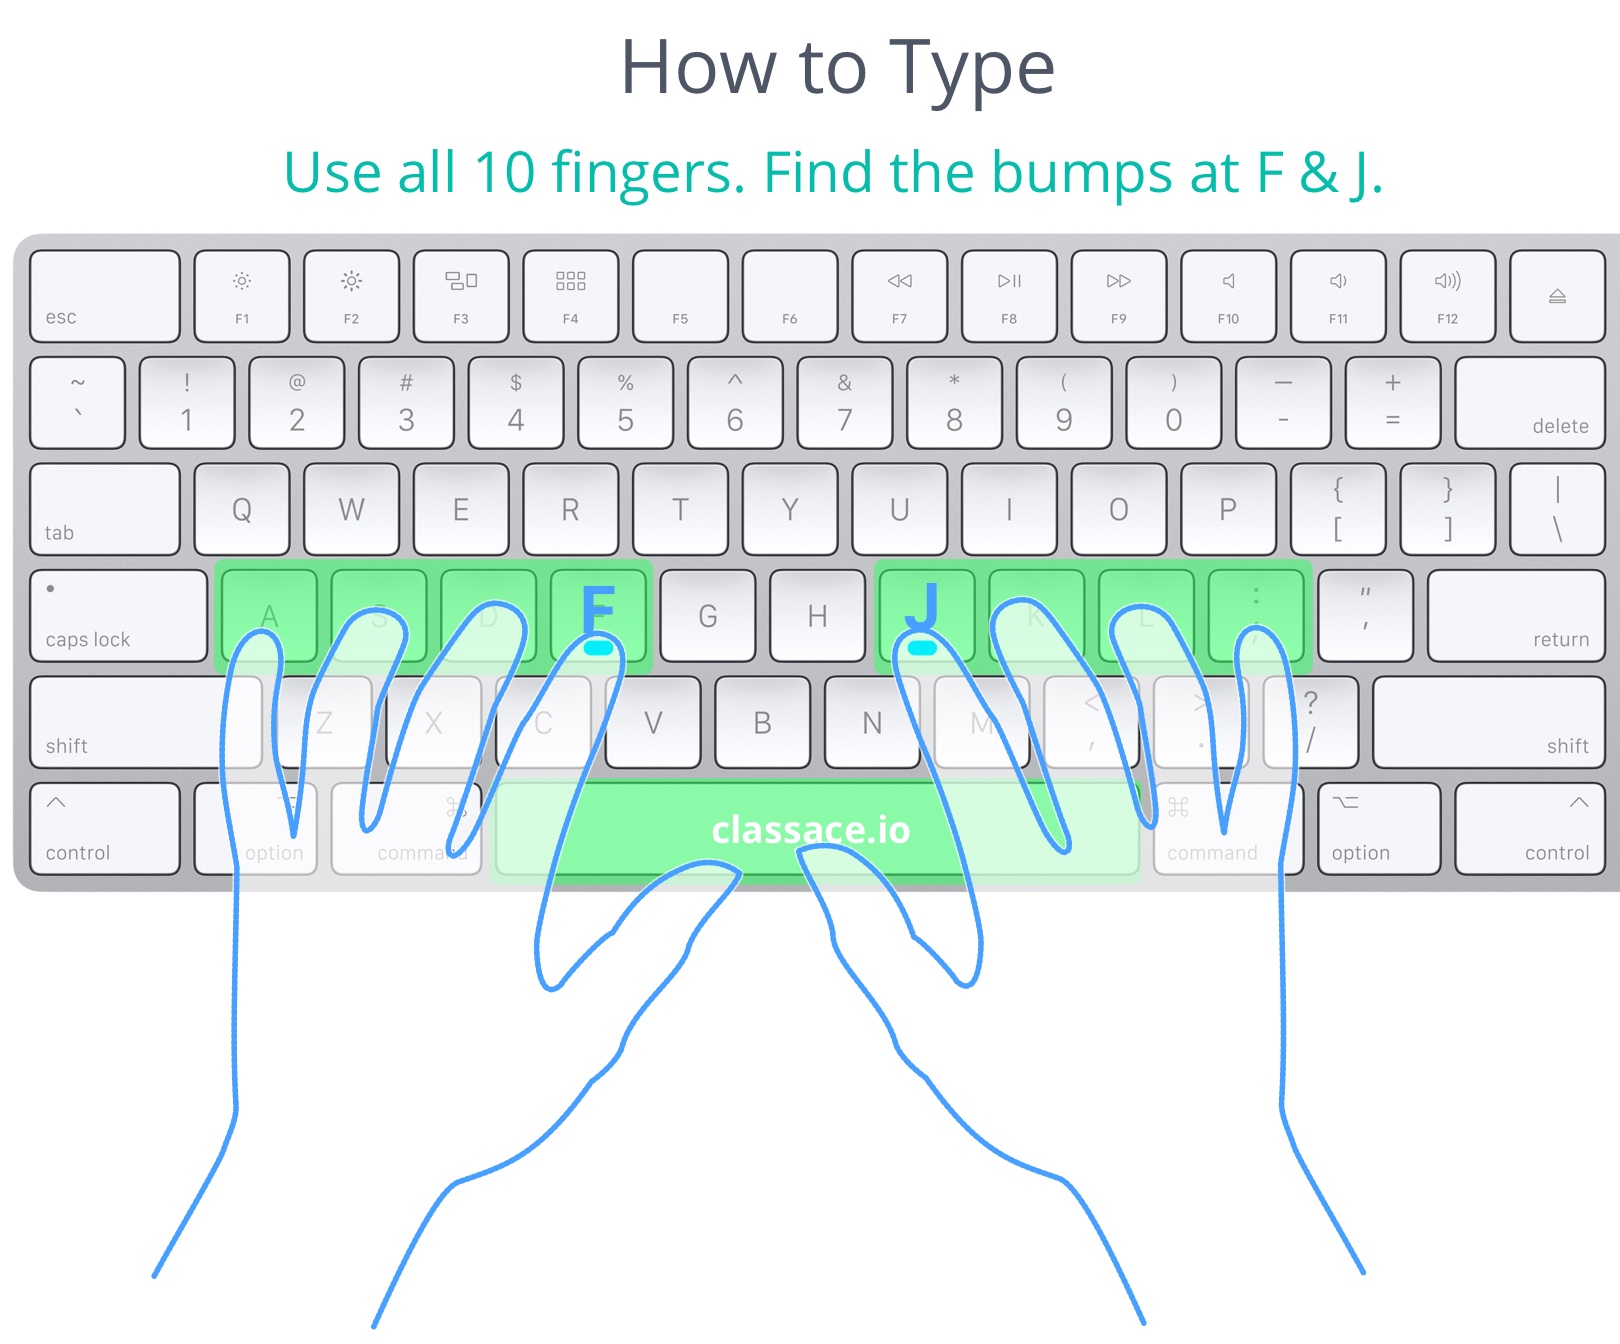 How to type standard placement on qwerty keyboard, index fingers on f and j 